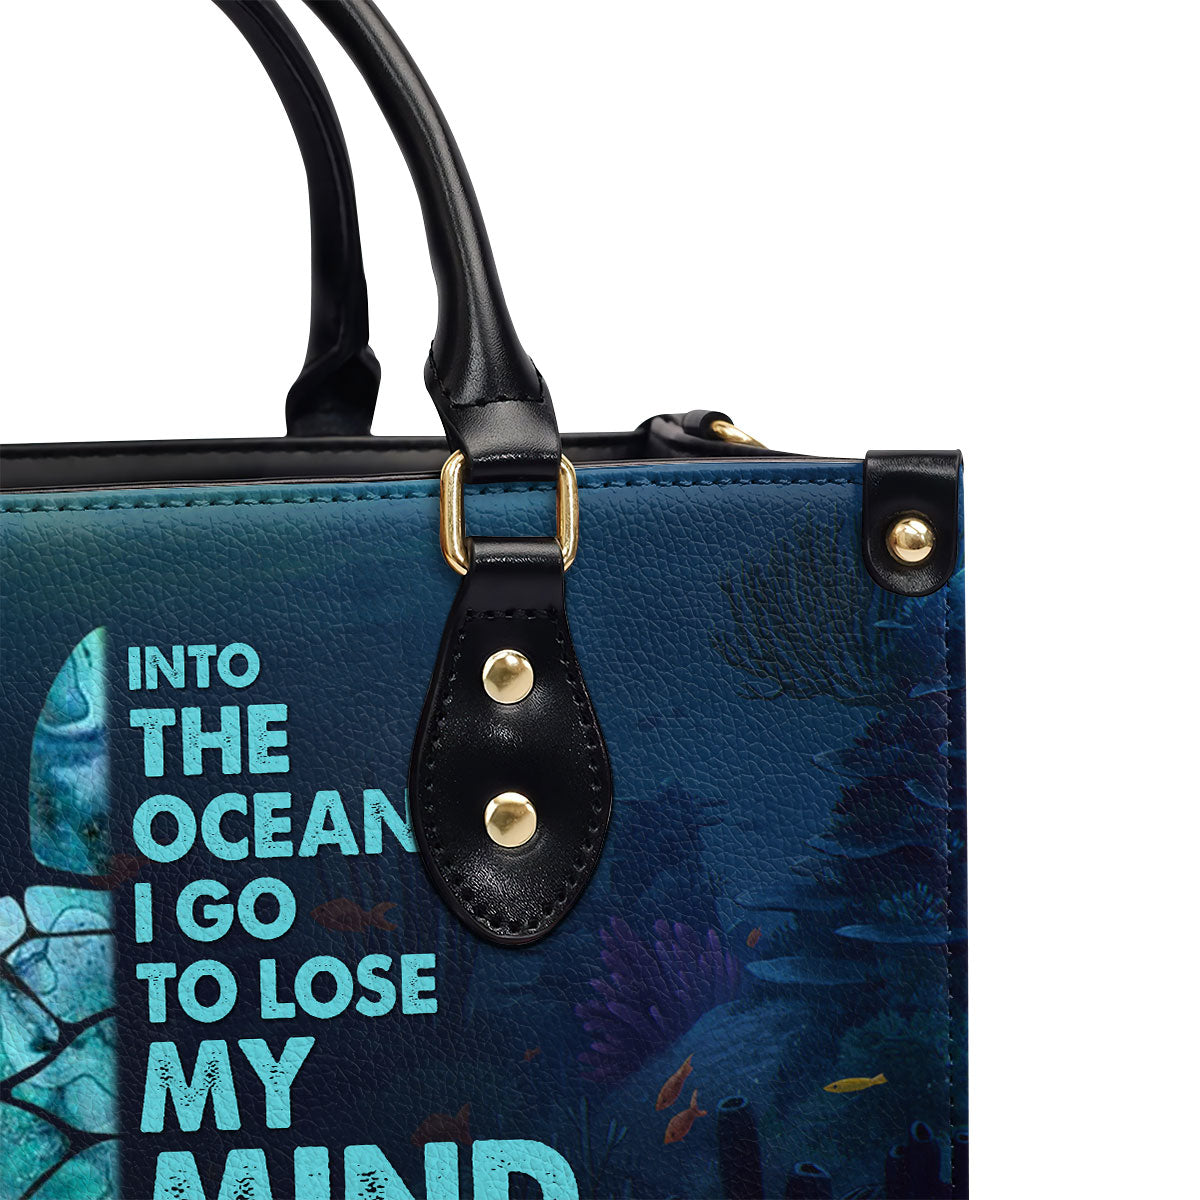 I Find My Soul - Personalized Leather Handbag MS-TH05A